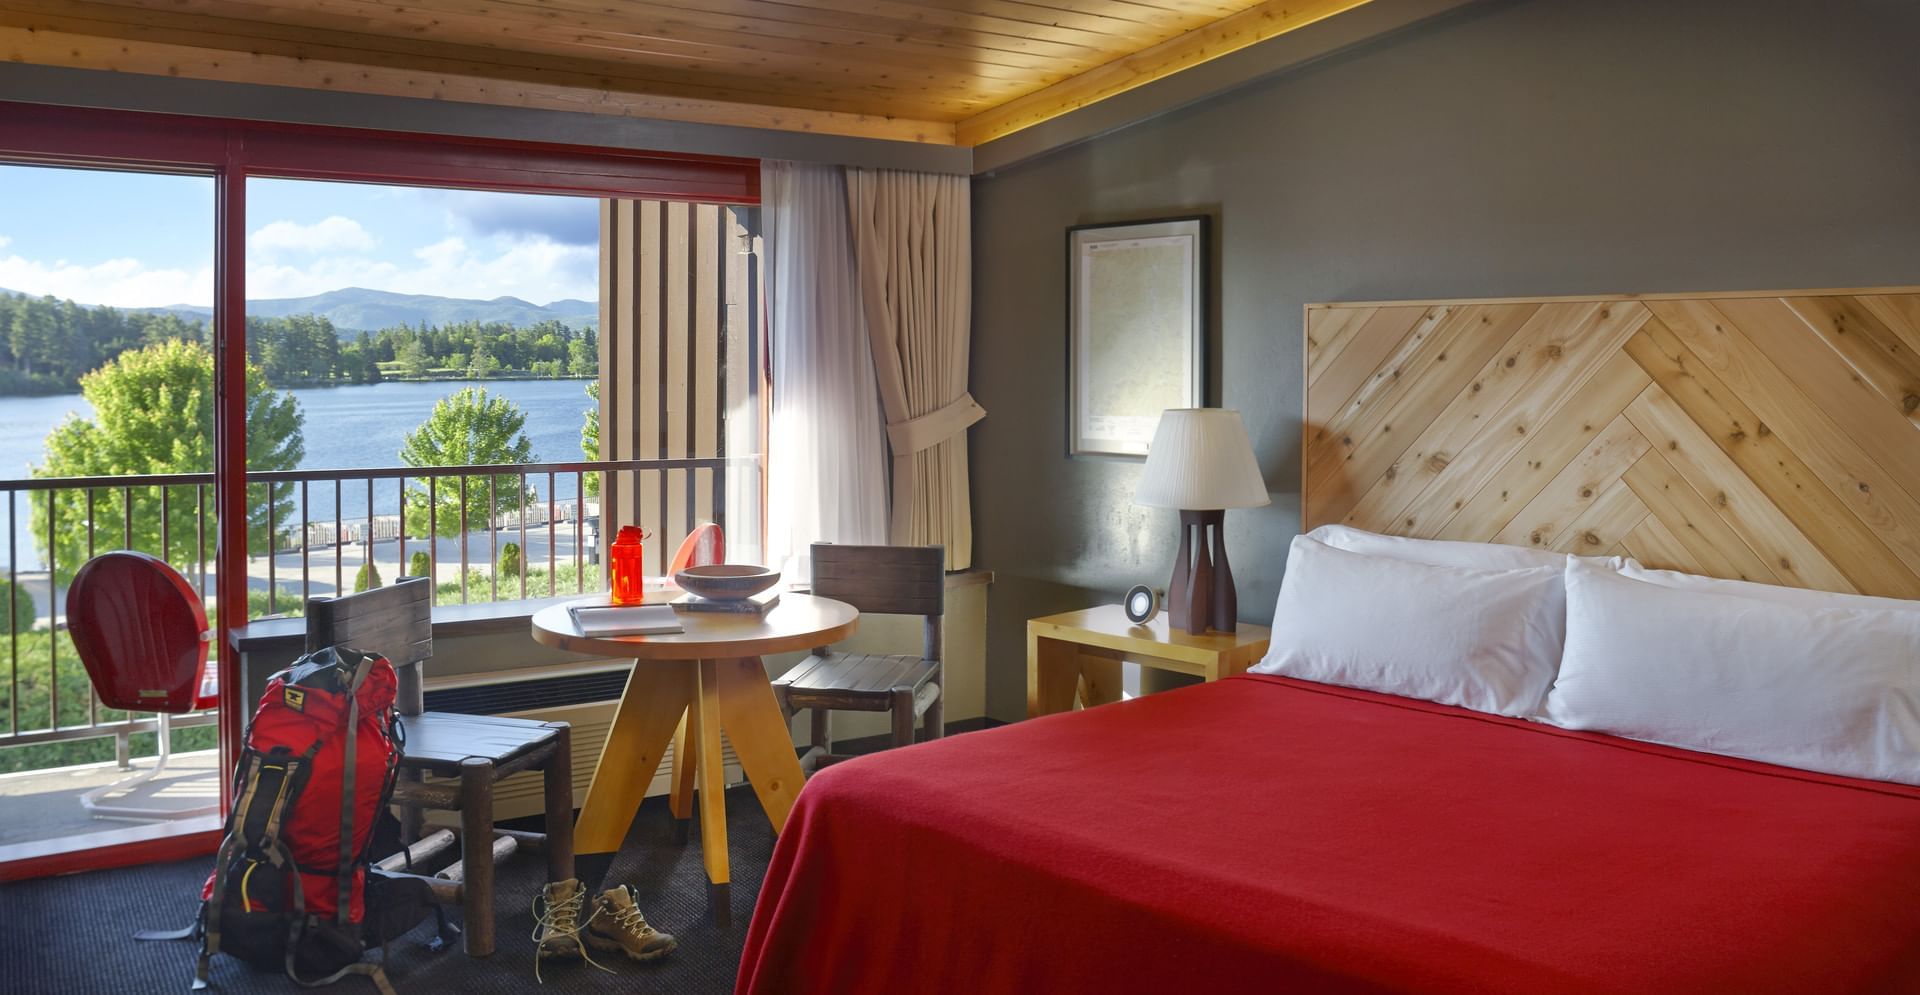 King Room with balcony in Lake House at High Peaks Resort